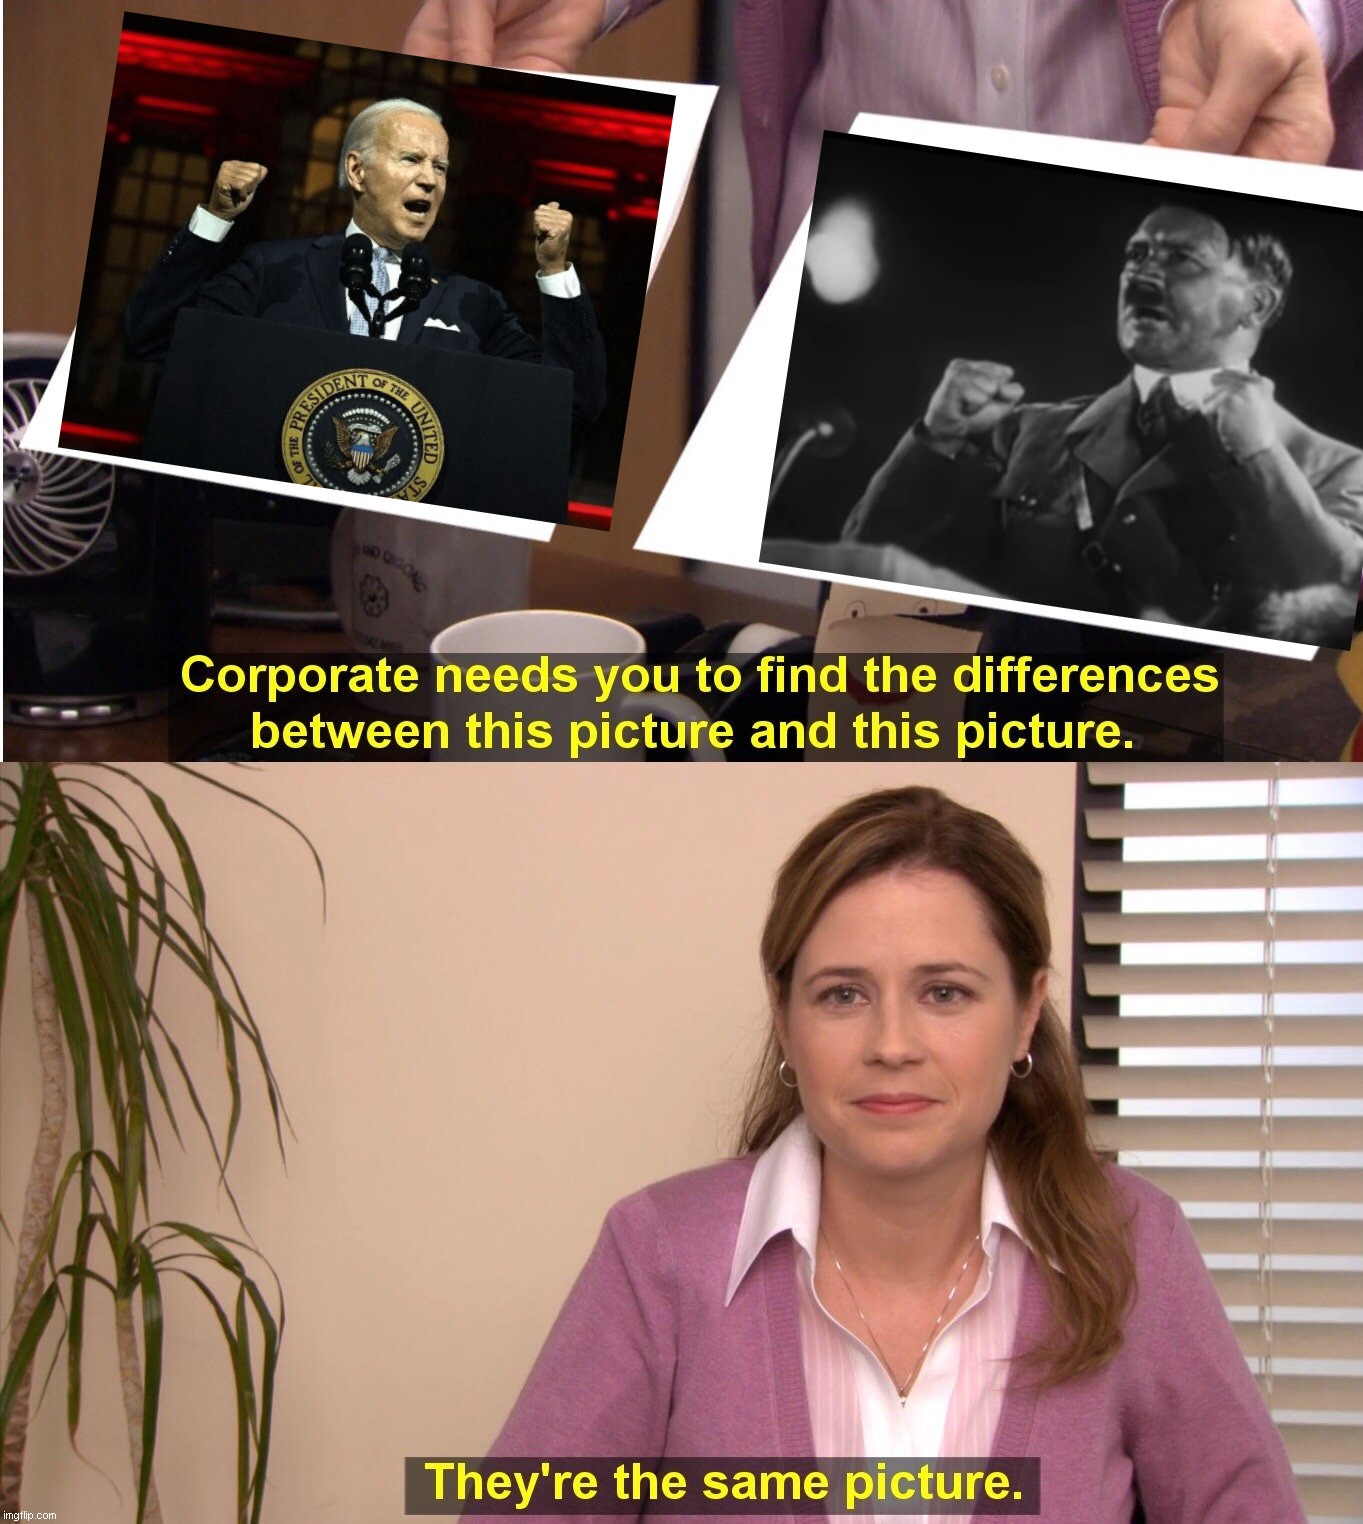 They're the same picture | image tagged in memes,they're the same picture,adolf hitler,joe biden,dictator,biden hates trump voters | made w/ Imgflip meme maker